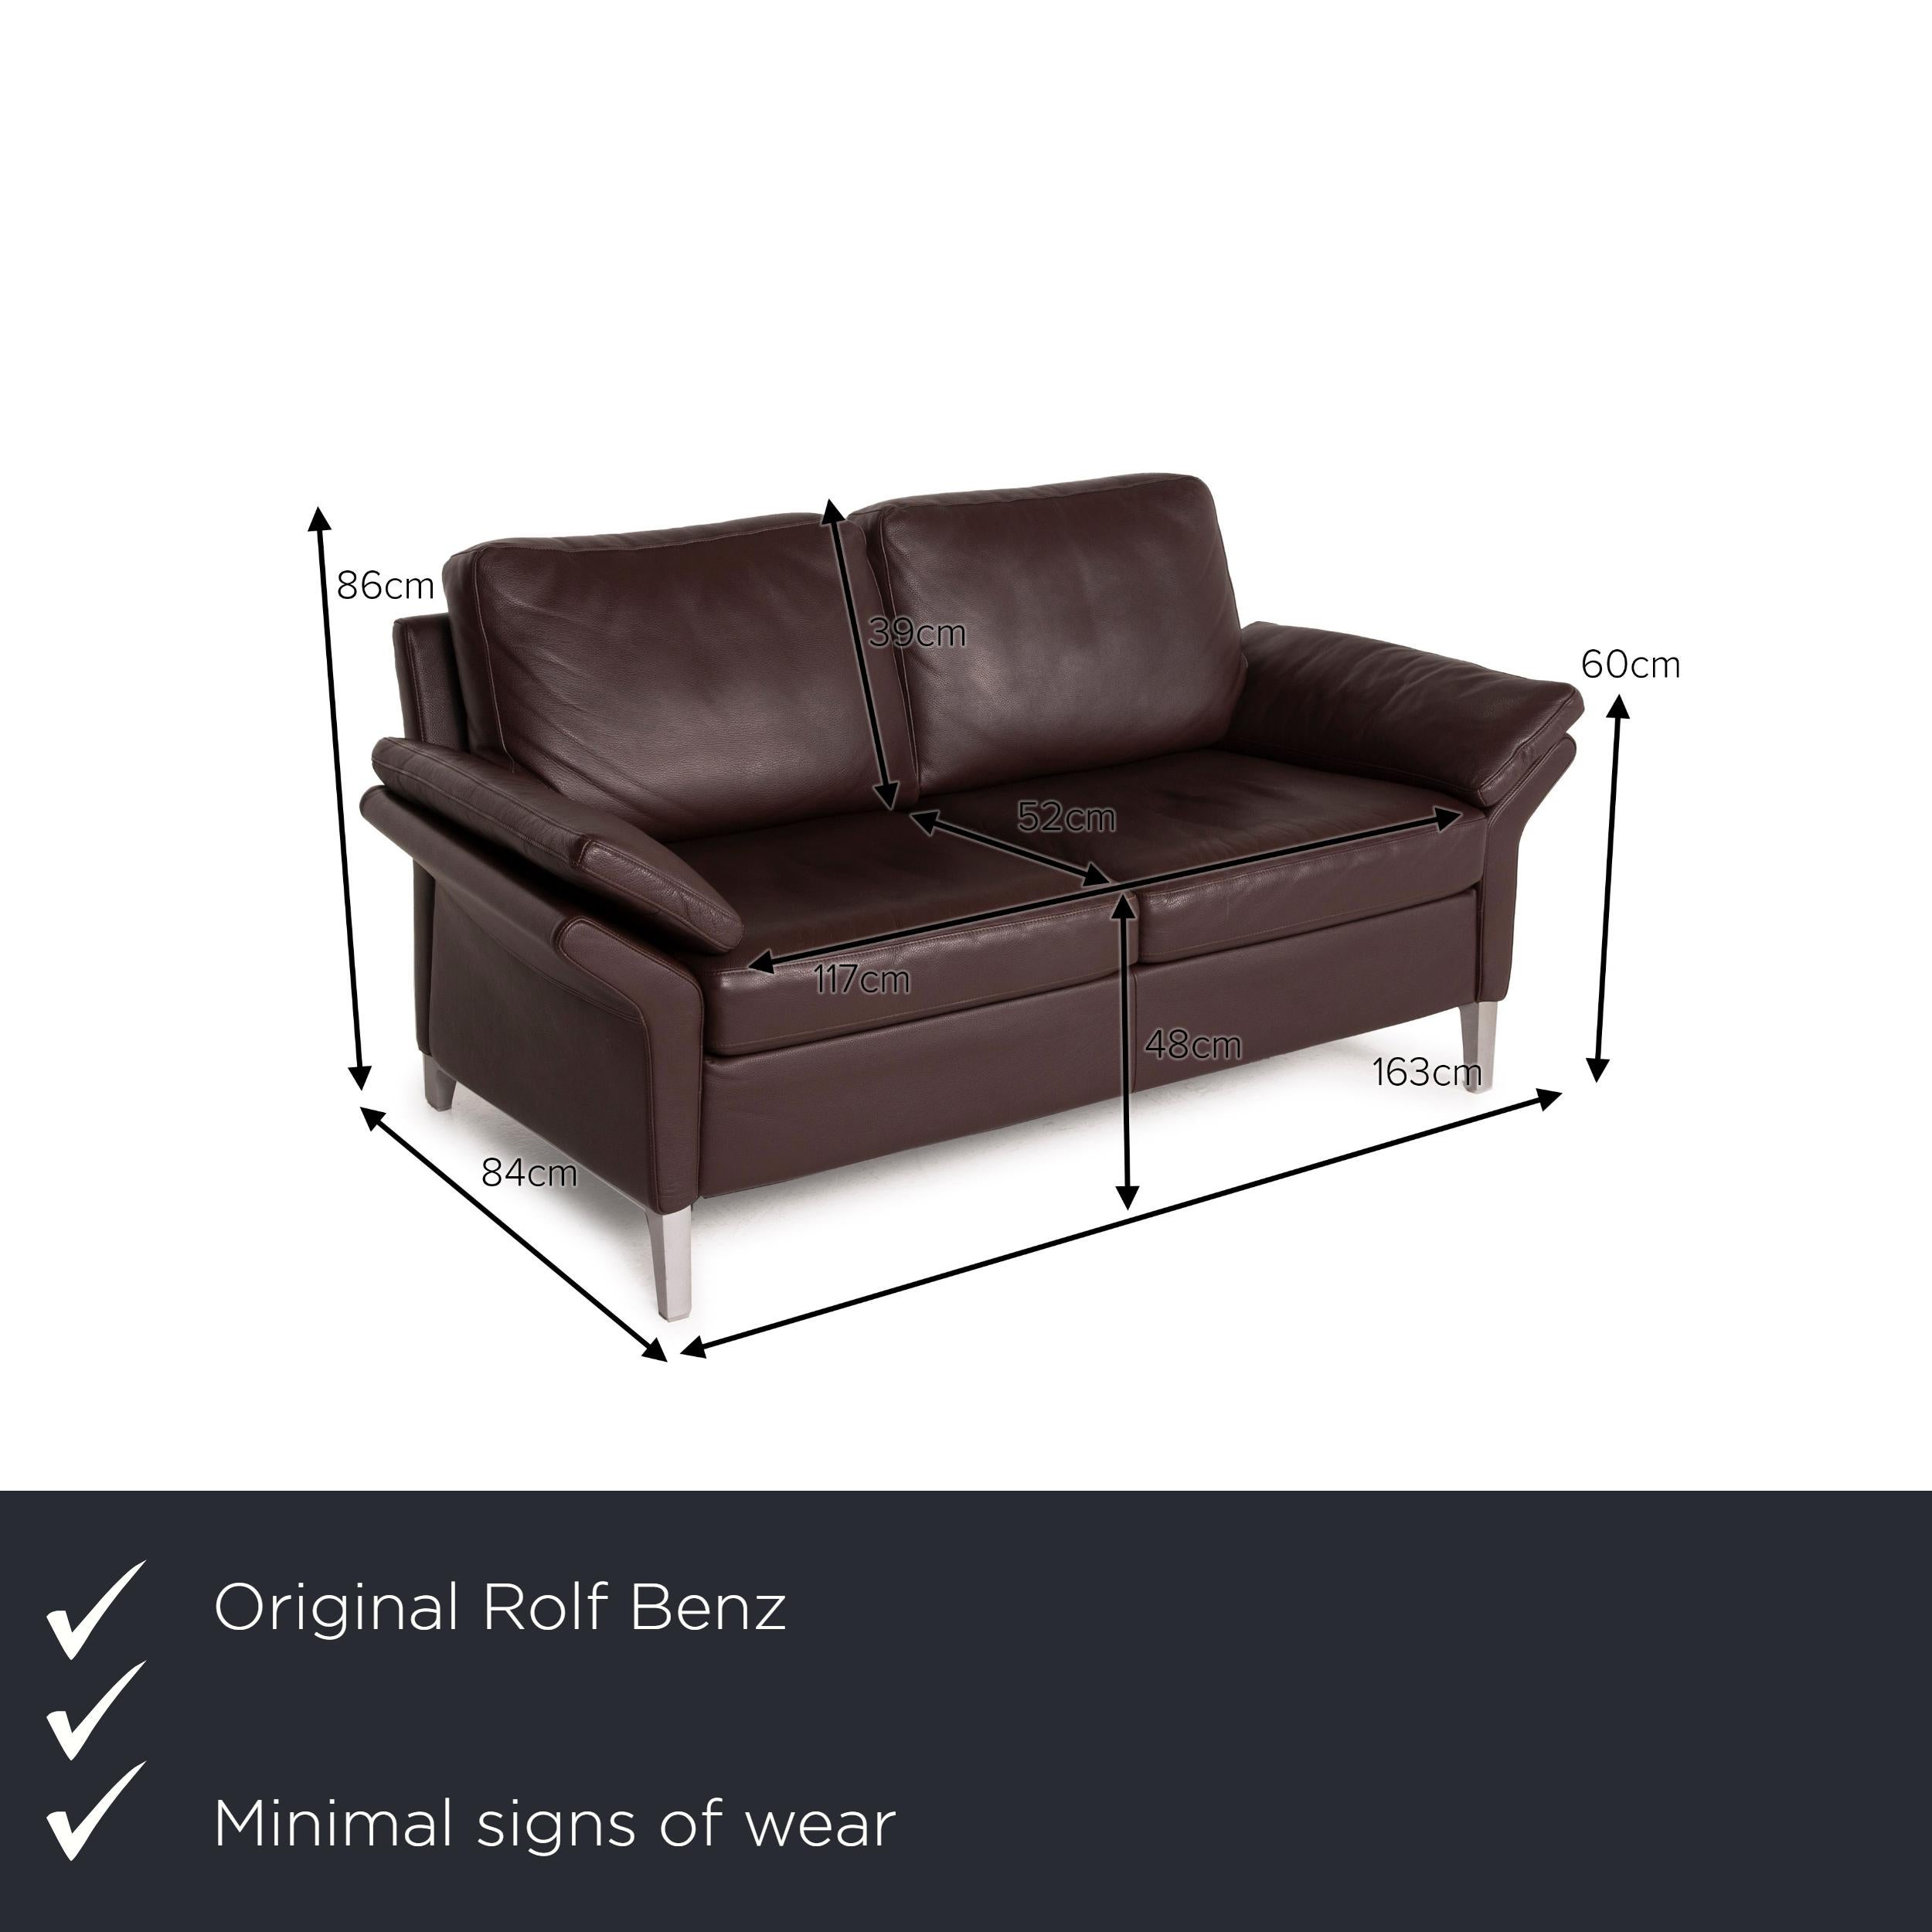 We present to you a Rolf Benz 3300 leather sofa brown two-seater.
 

 Product measurements in centimeters:
 

Depth: 84
Width: 163
Height: 86
Seat height: 48
Rest height: 60
Seat depth: 52
Seat width: 117
Back height: 39.

 